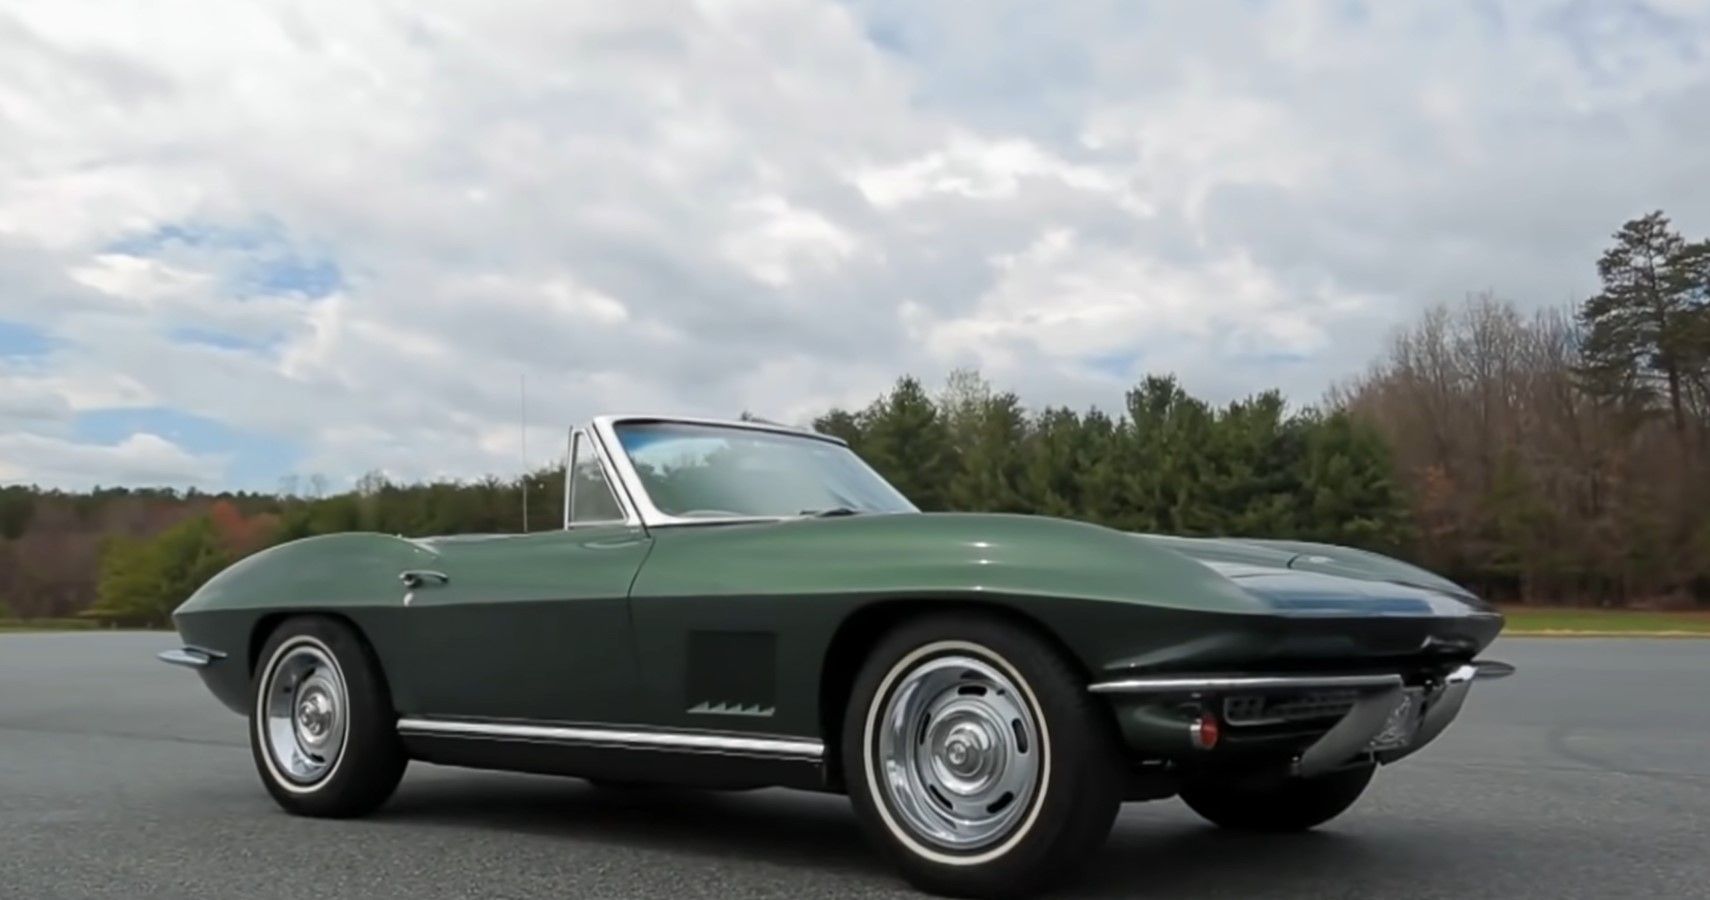 Why We Are Obsessed With Joe Biden’s Beautifully Restored Chevrolet Corvette